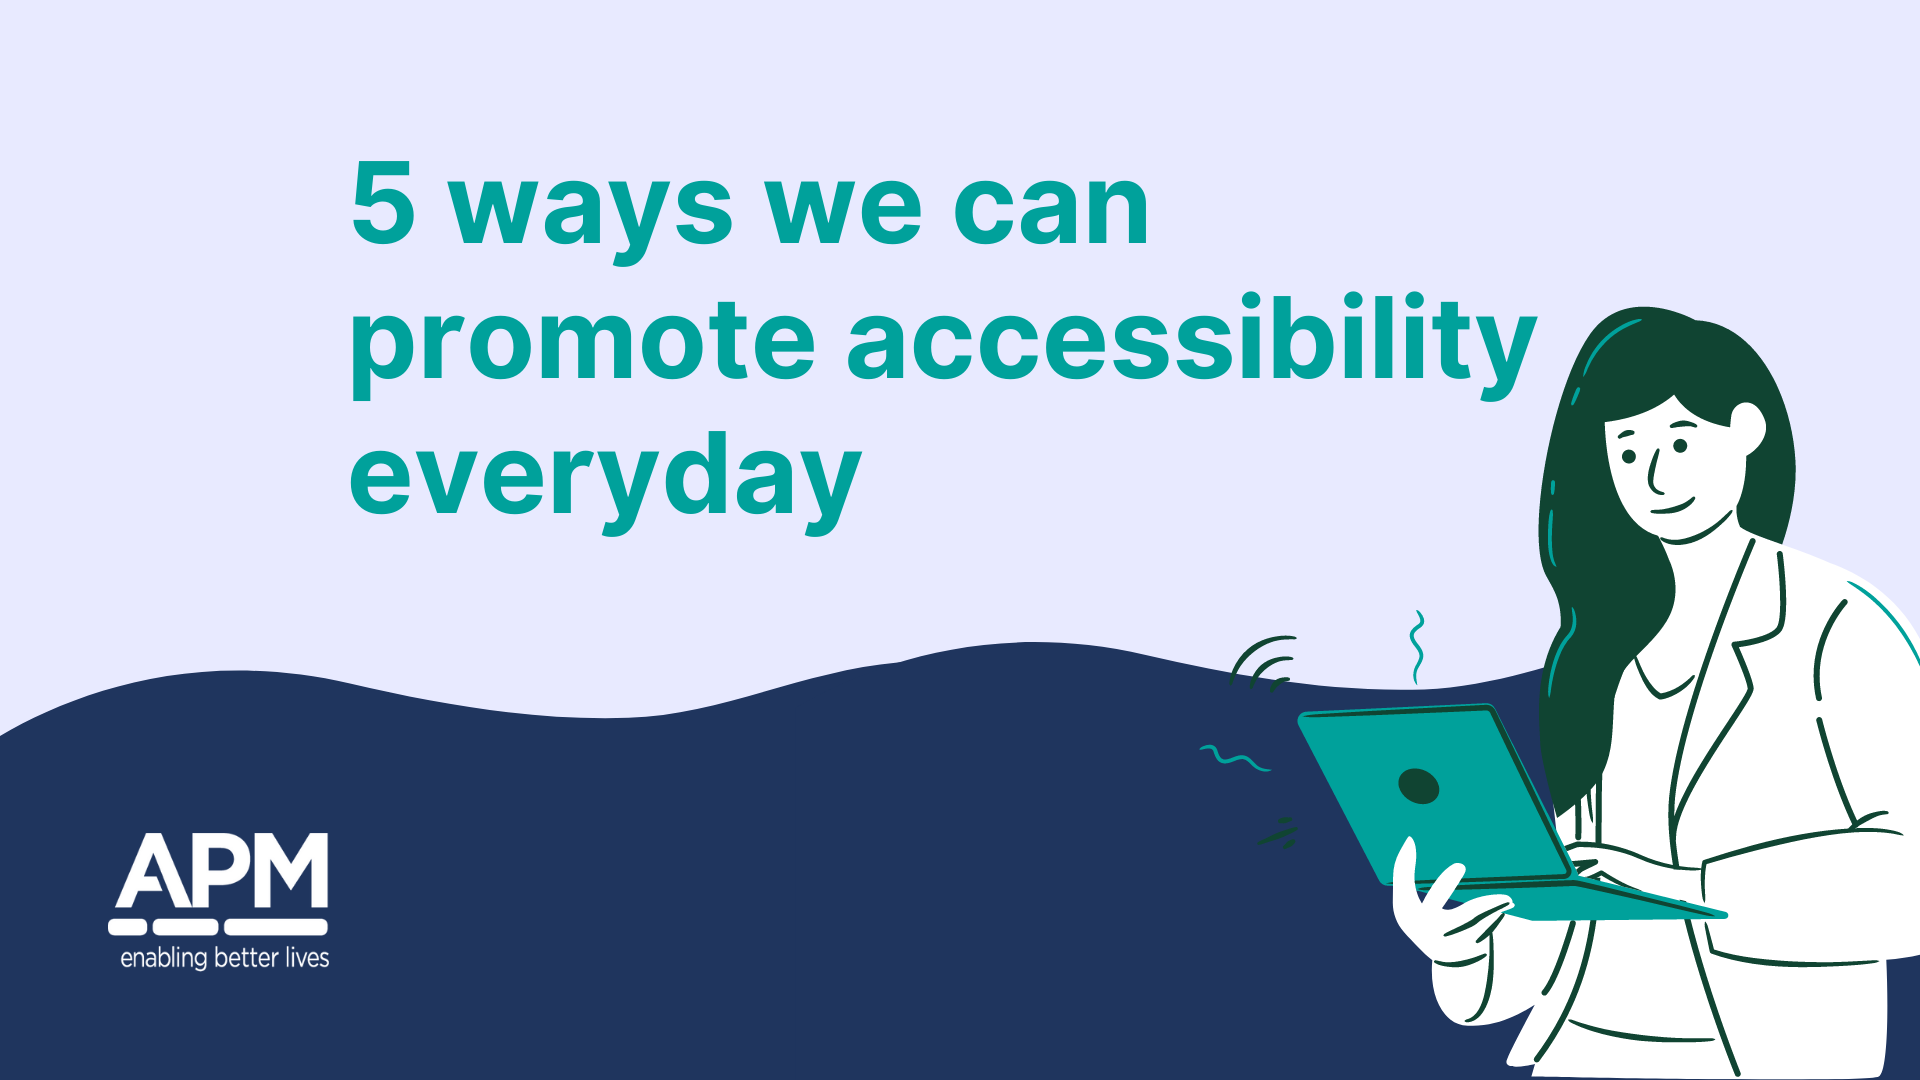 Everyone can create better accessibility and inclusion for people with disability.